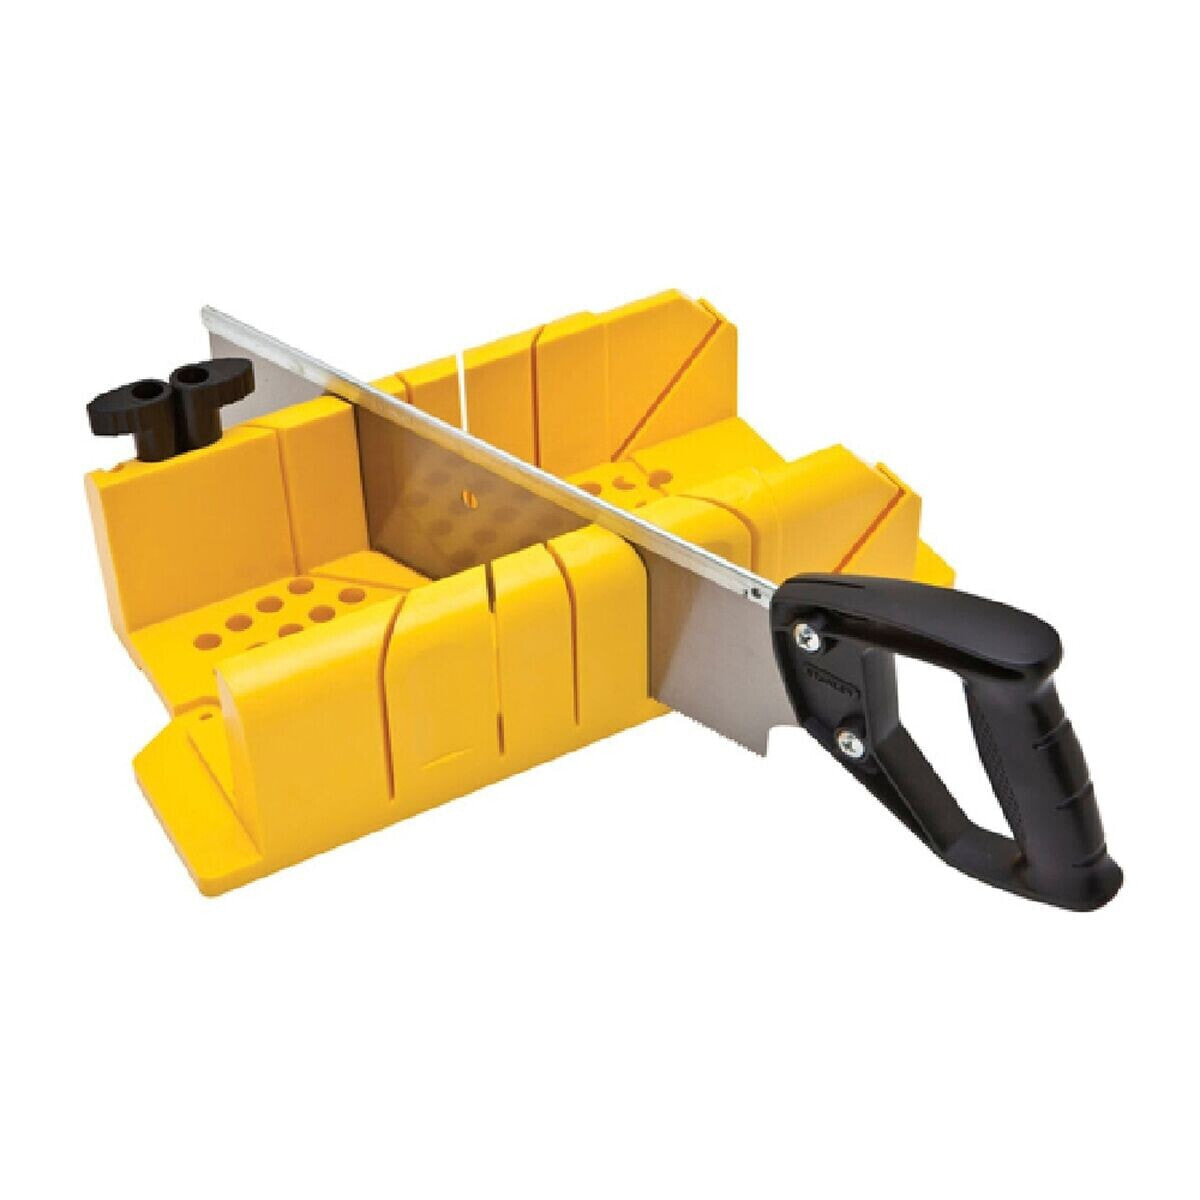 Mitre saw Stanley 1-20-600 Yellow